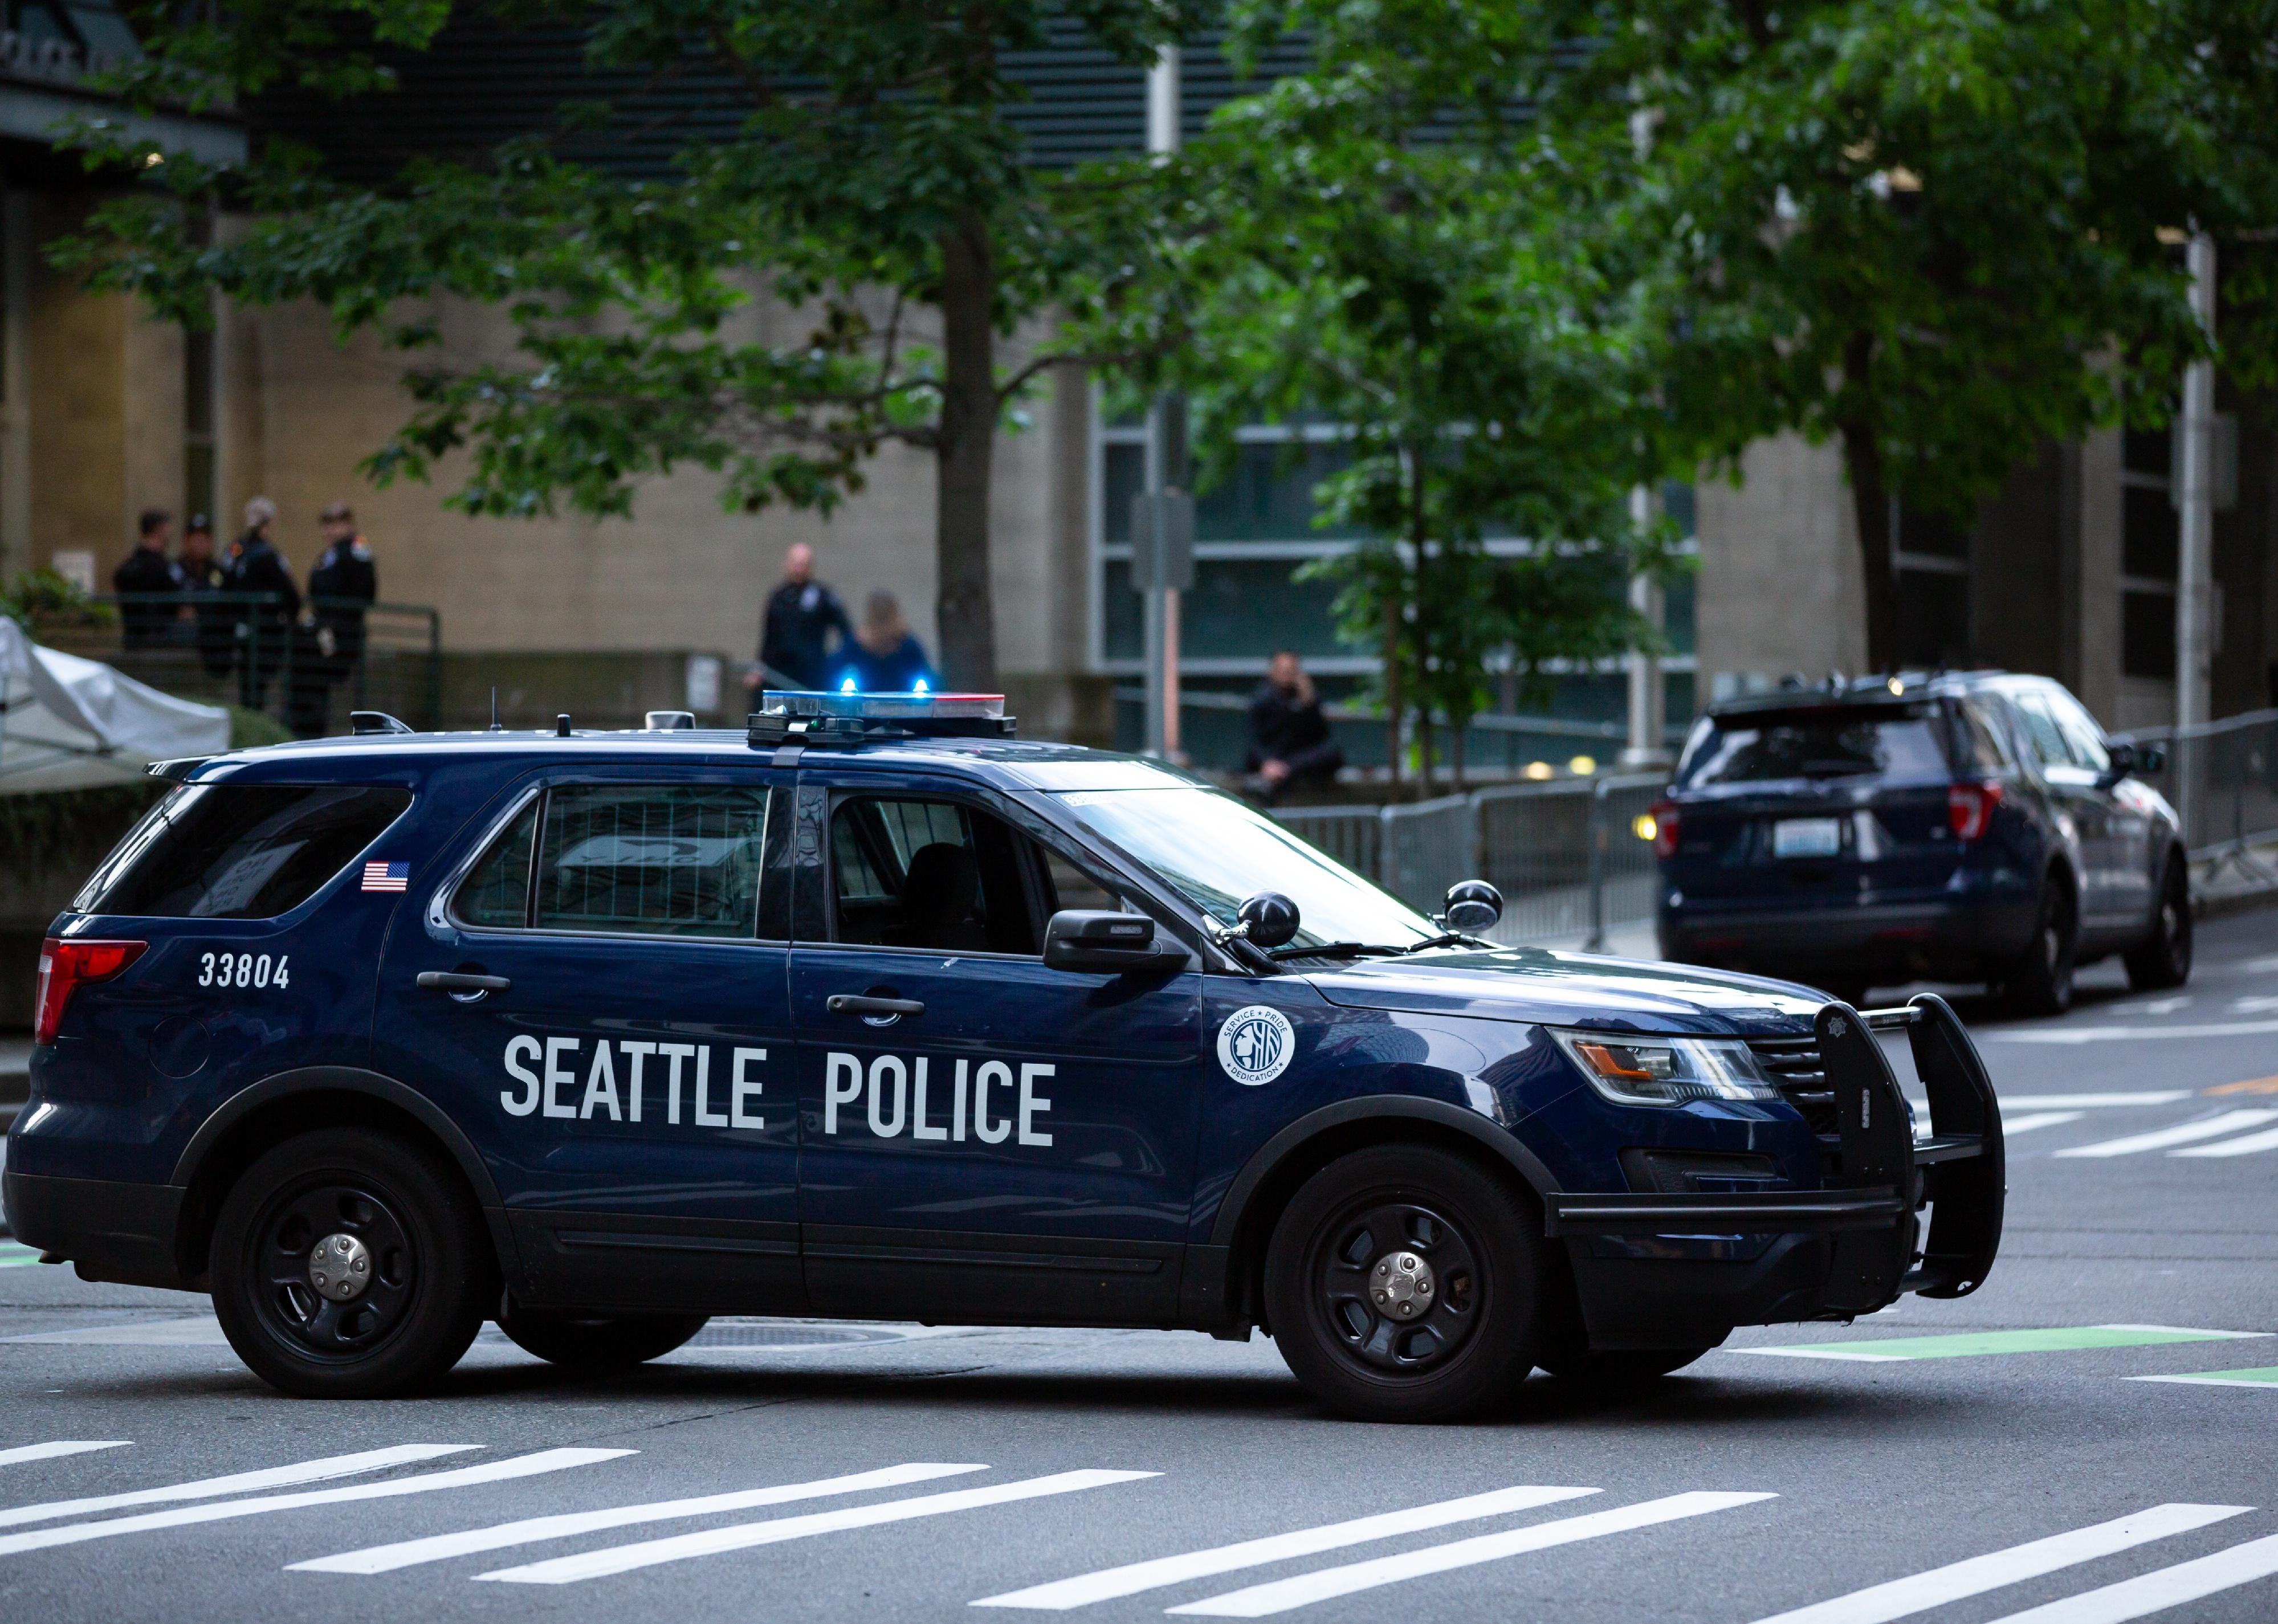 Patrol car in front of the Seattle Police Department West Precinct.